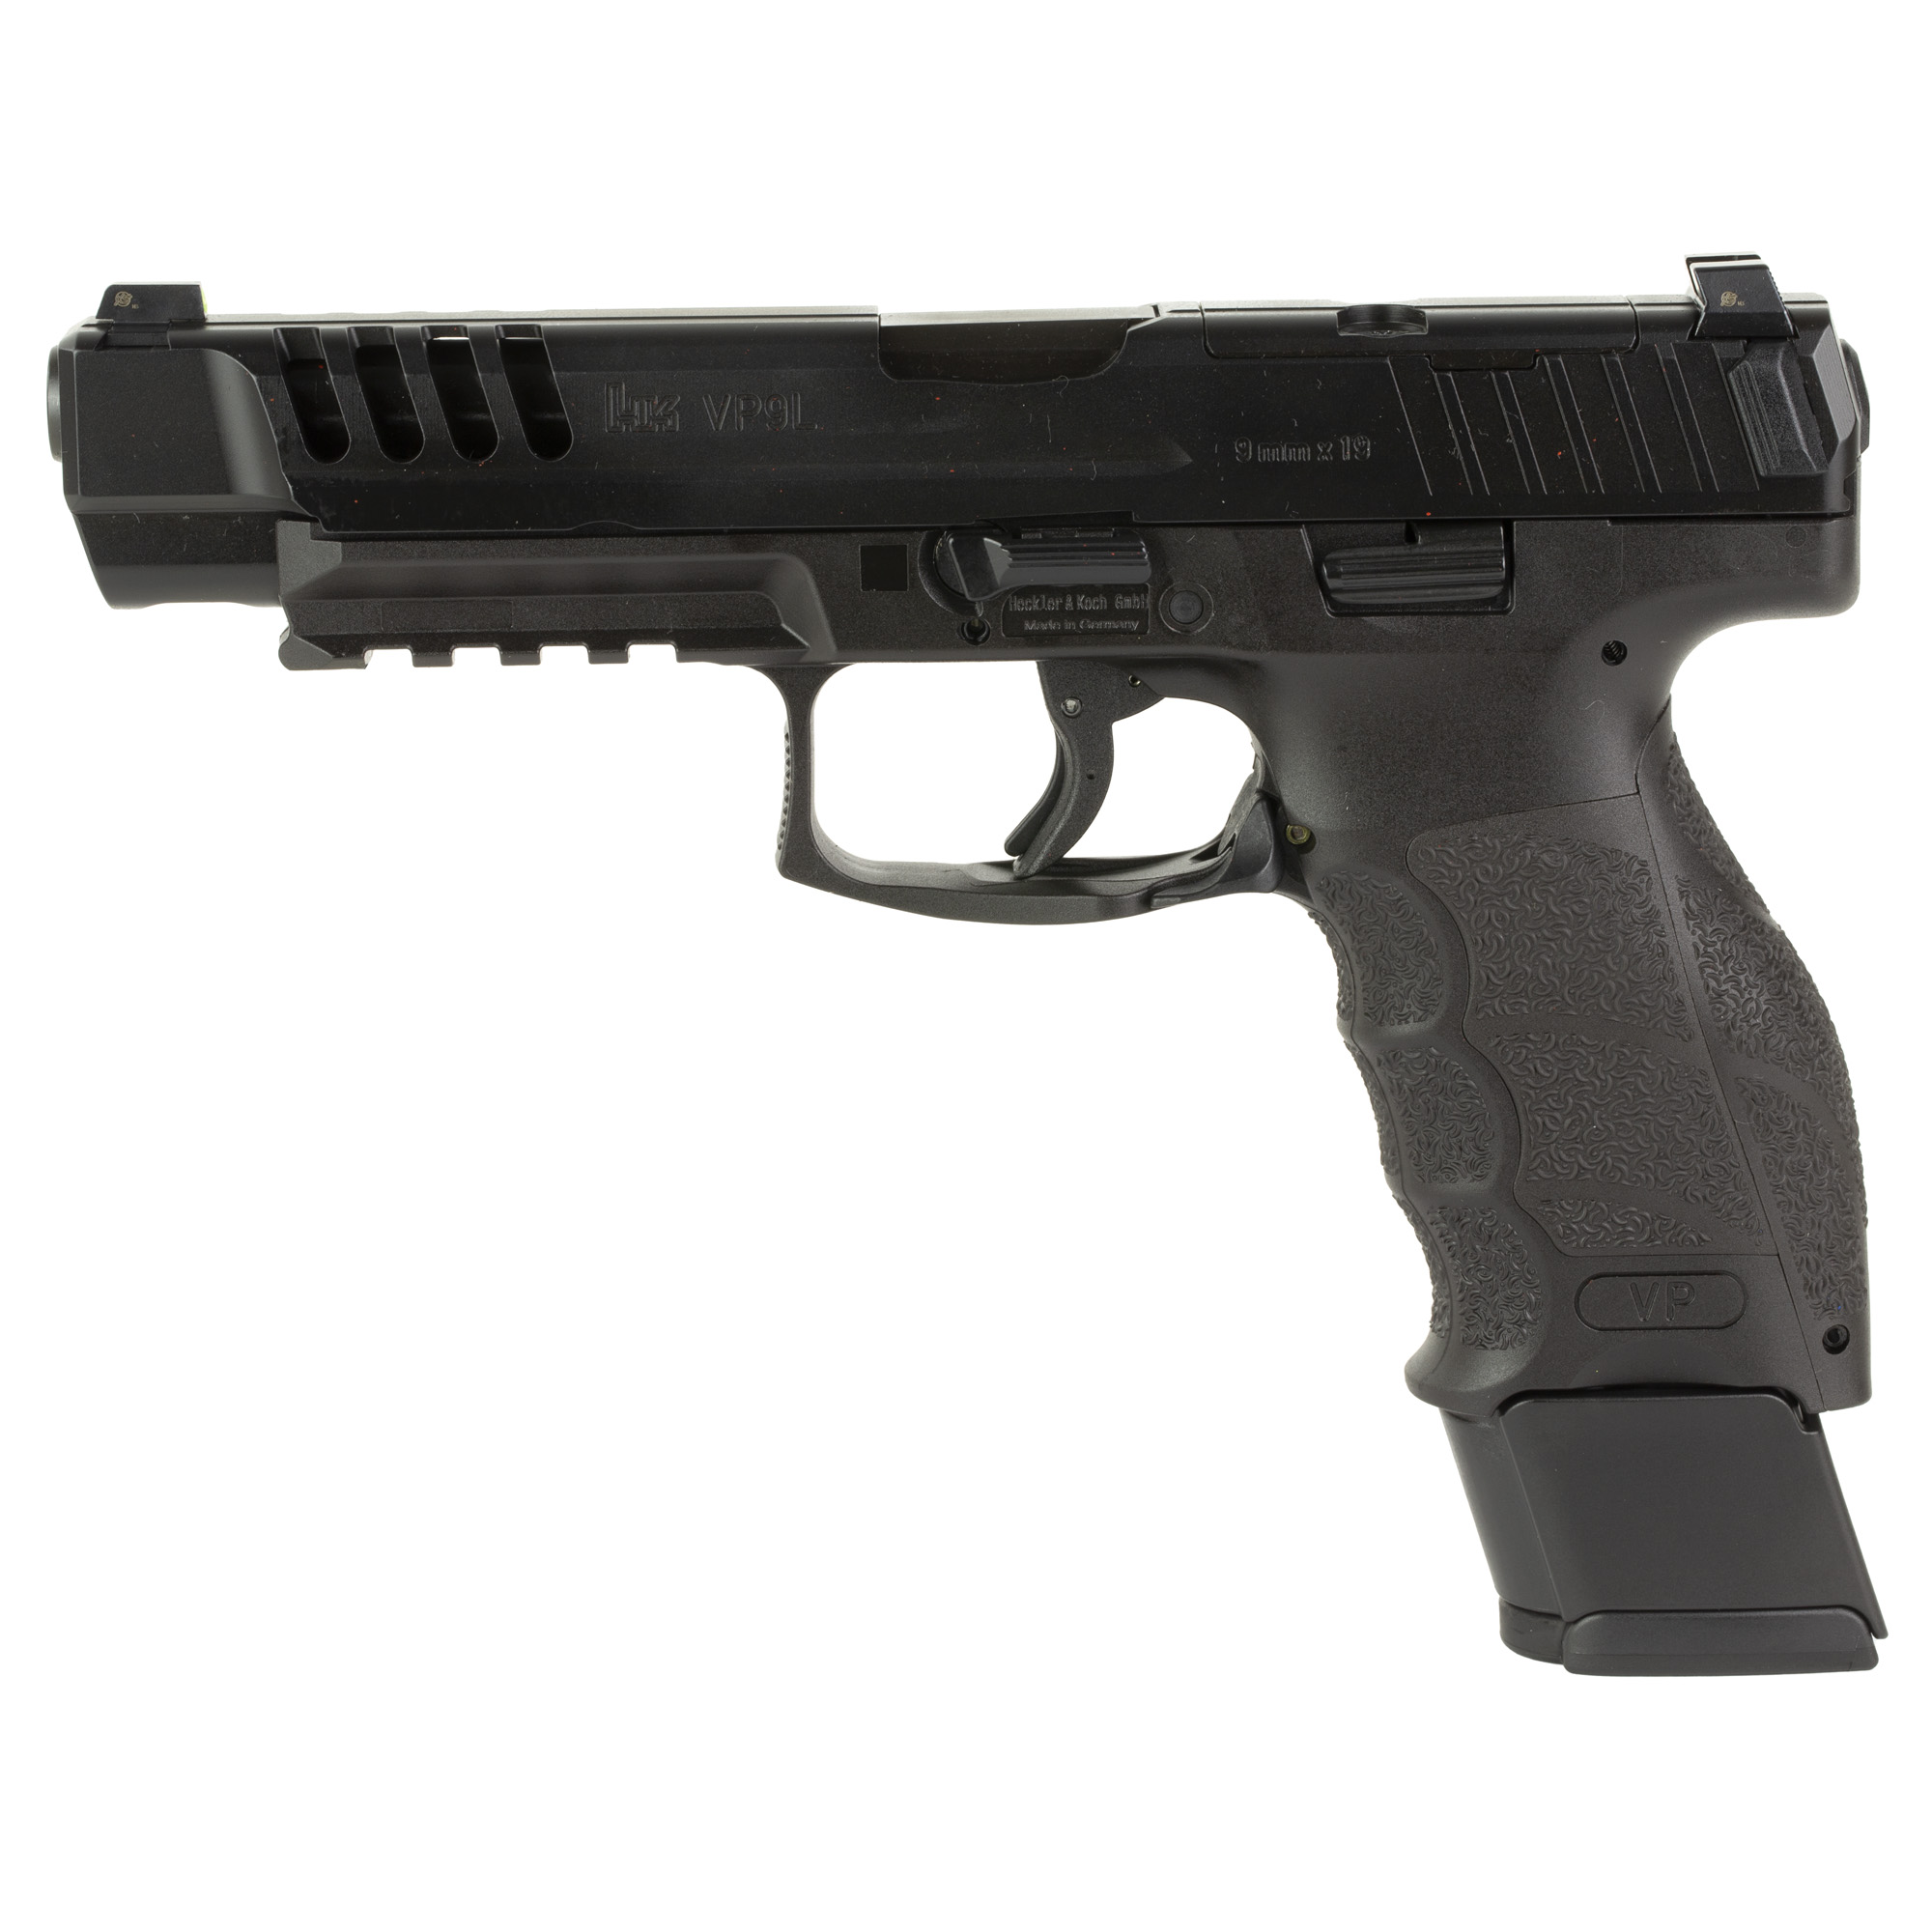 HK VP9L OR 9MM 5 20RD BLK NS